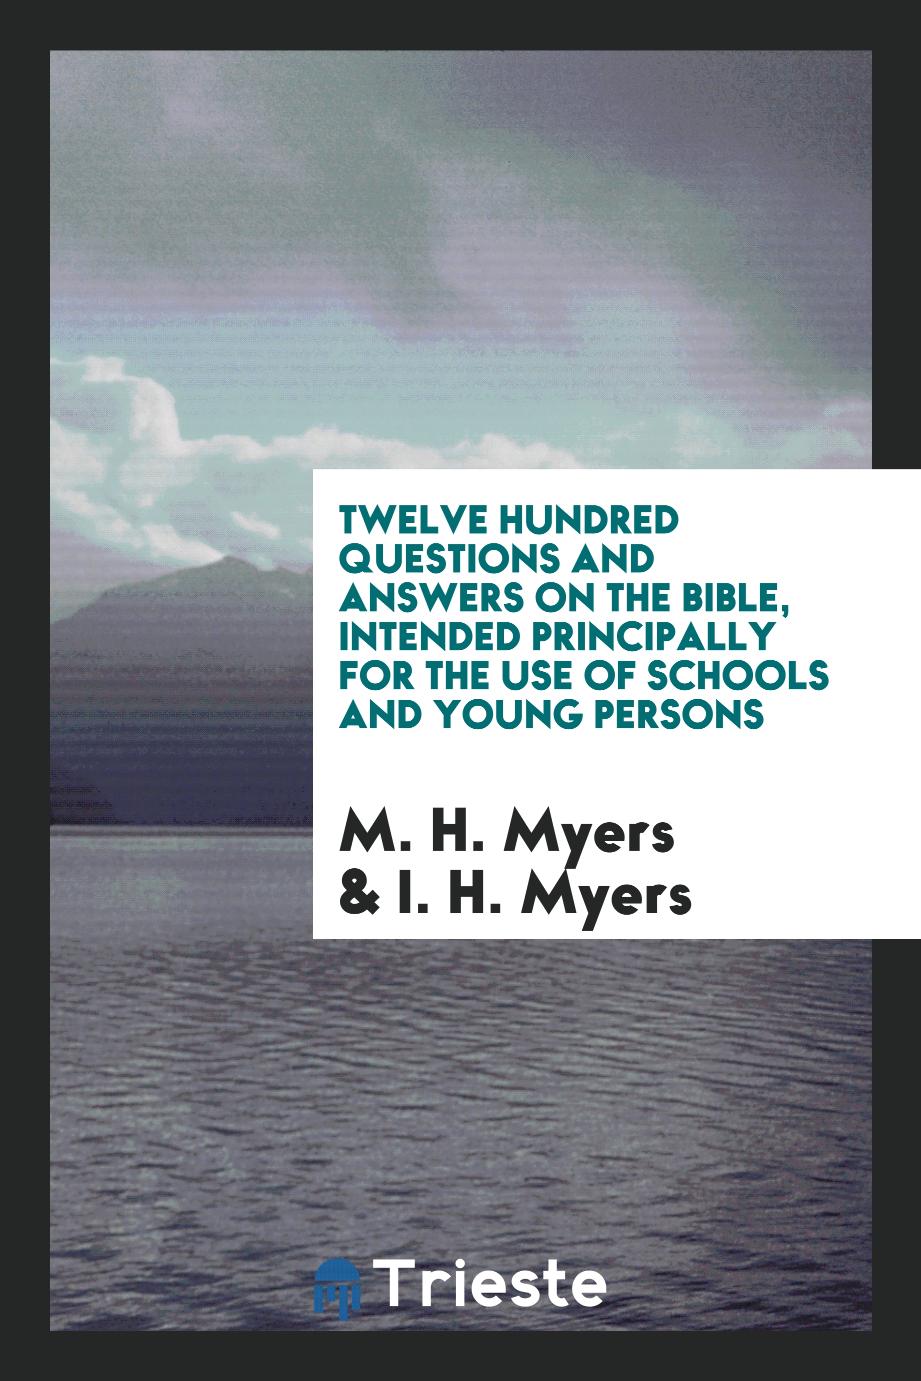 Twelve Hundred Questions and Answers on the Bible, Intended Principally for the Use of Schools and Young Persons